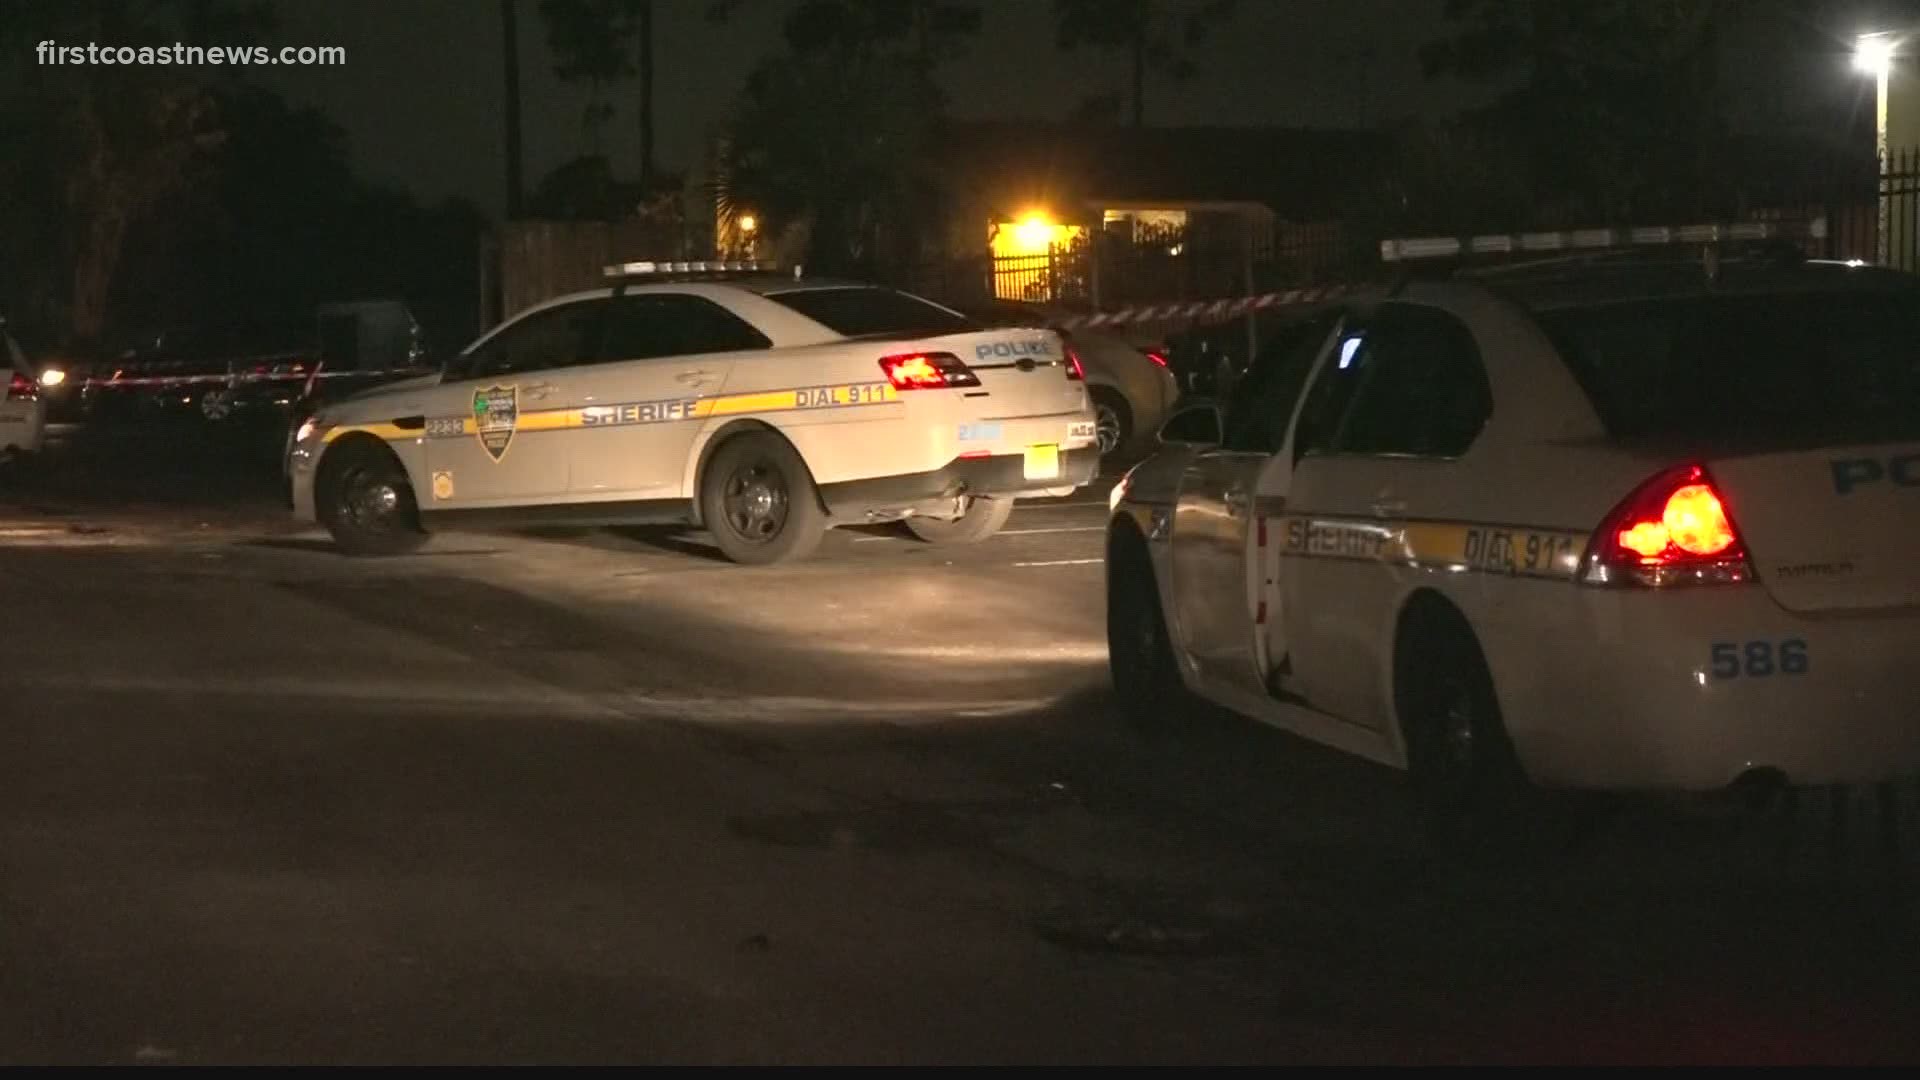 Police said the man was found inside an apartment, where he had been shot several times. The victim is not cooperating with investigators, according to JSO.